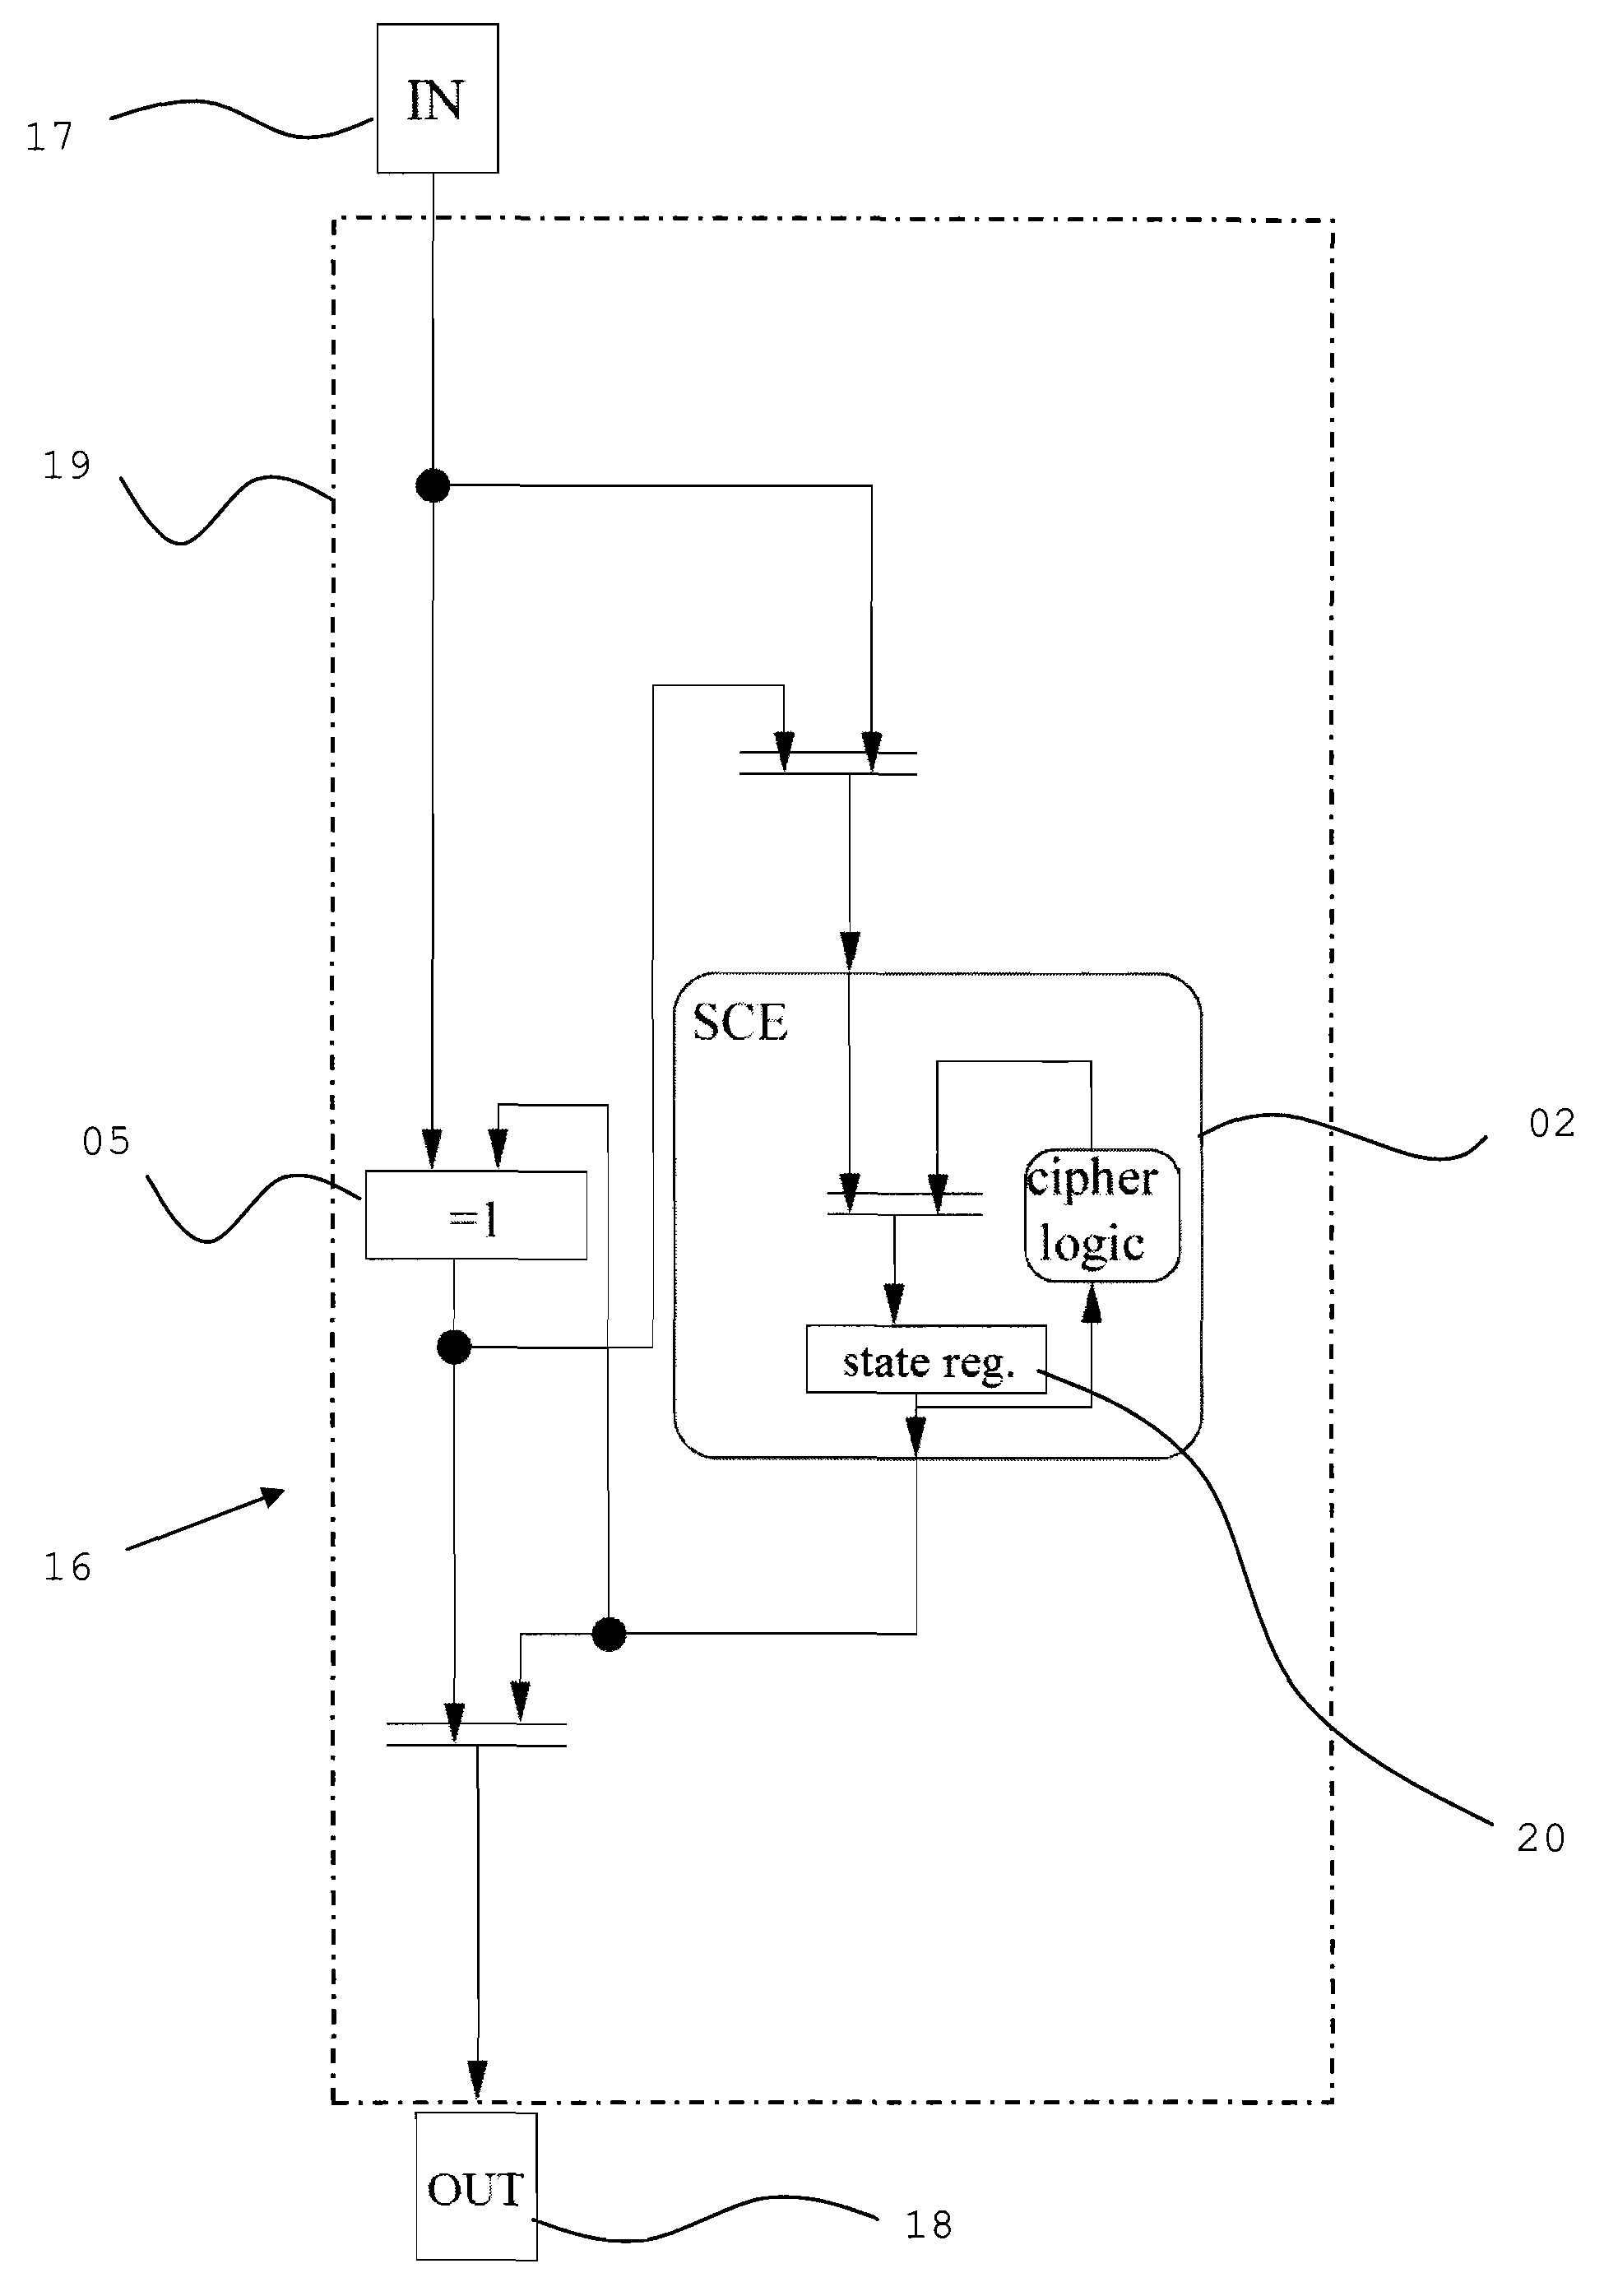 Apparatus and method for operating a symmetric cipher engine in cipher-block chaining mode